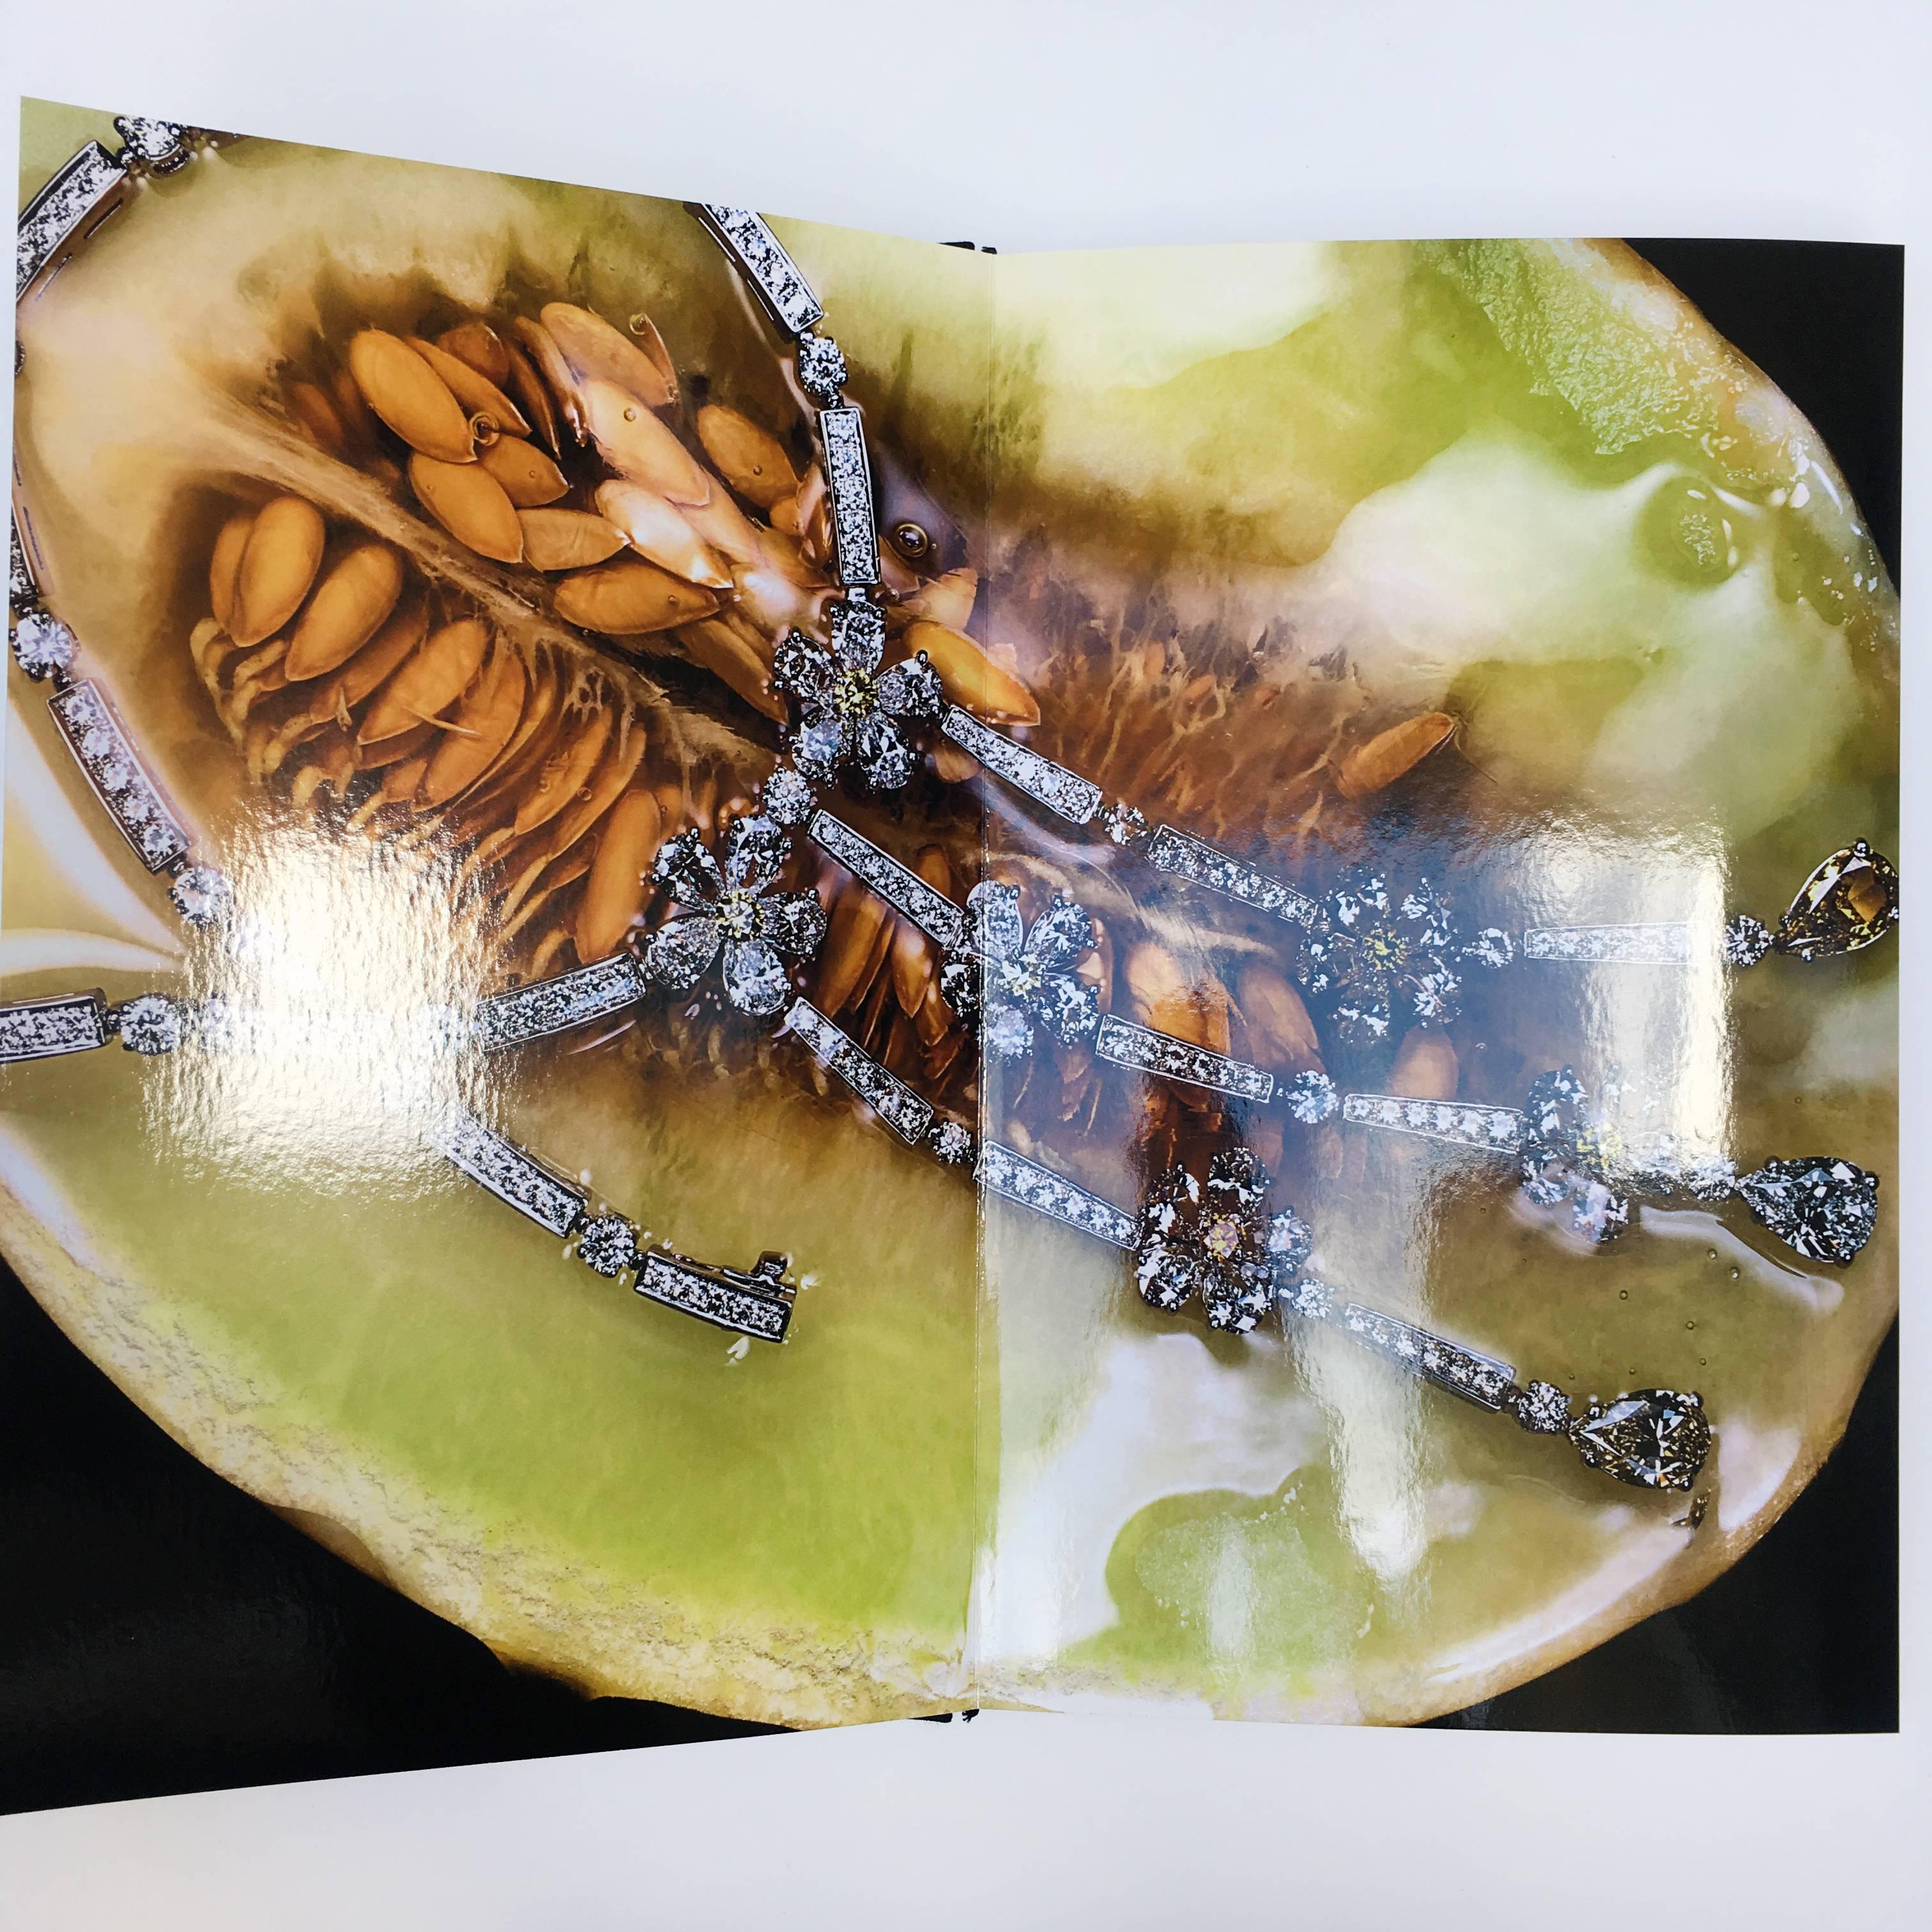 First edition, published in 2010.

Bvlgari's jewels are not just jewelry, they are fine artistic creations. In this glossy photobook, published on the occasion of the 125th anniversary of the foundation of the Maison, renowned contemporary